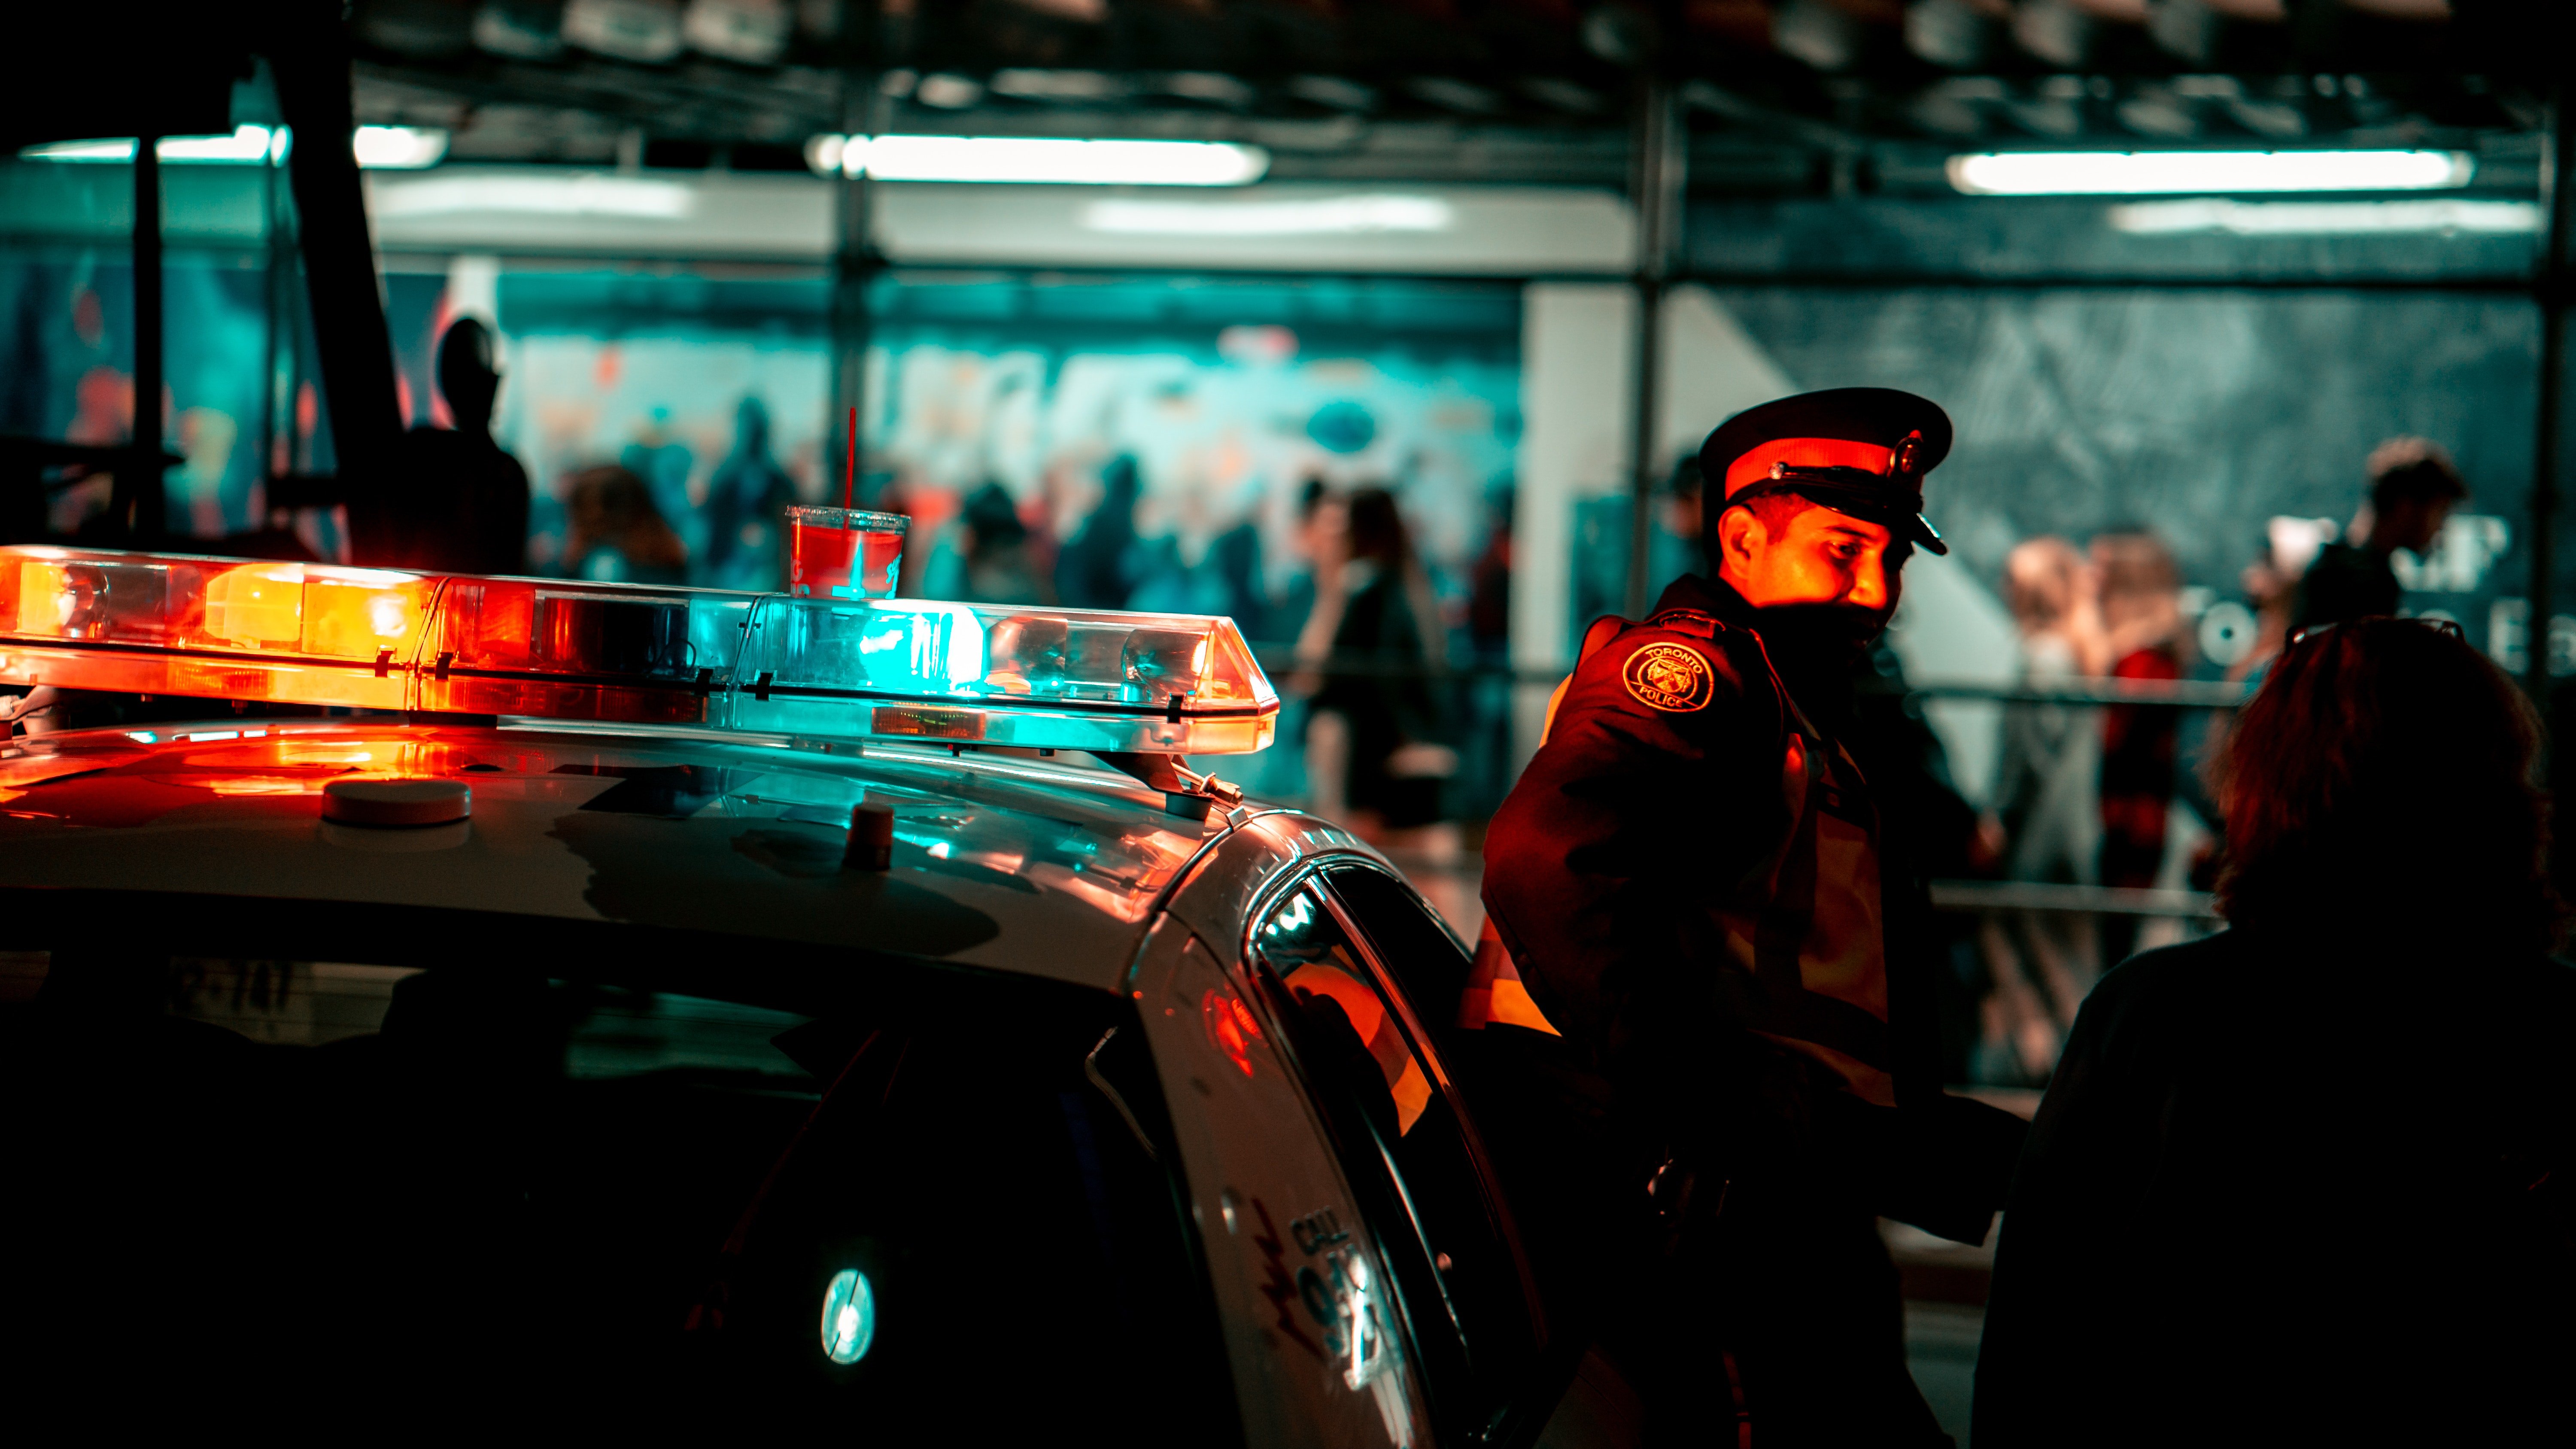 A policeman attending to a problem | Photo: Pexels